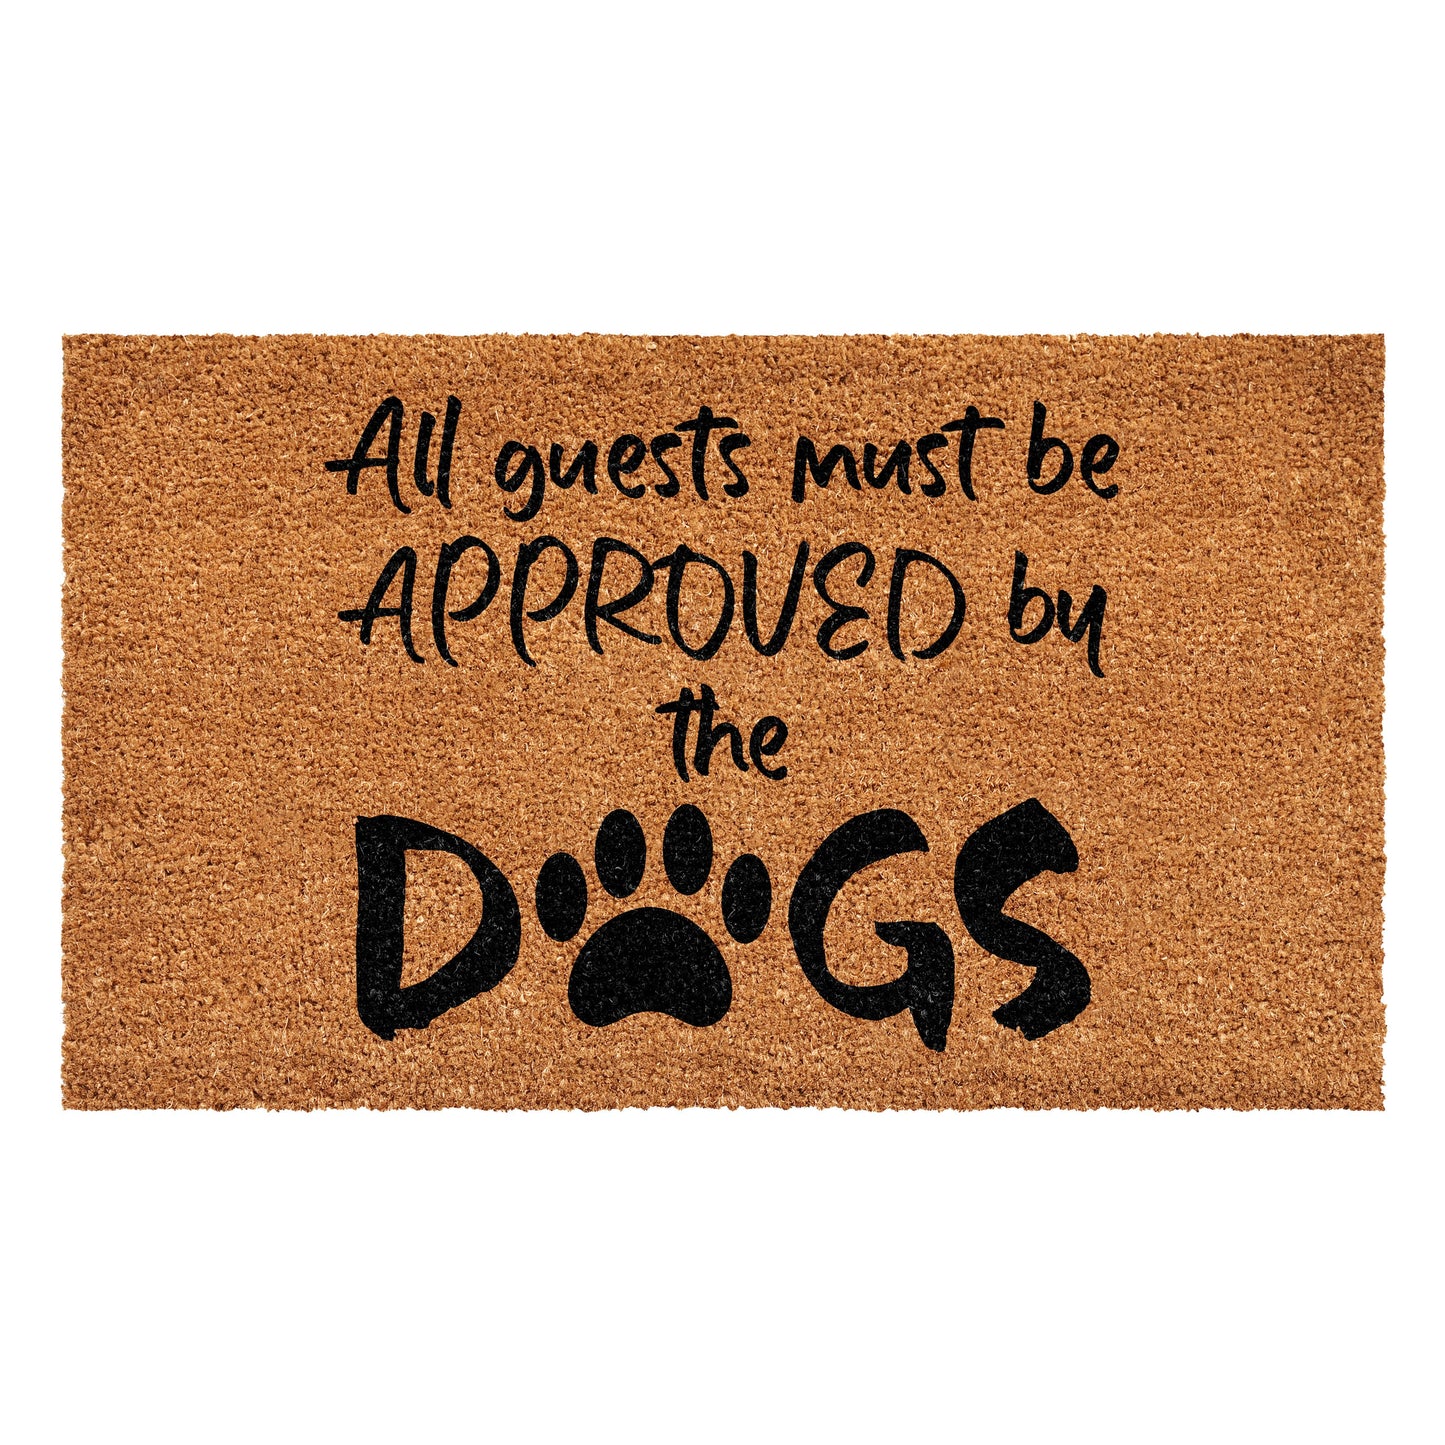 CallowayMills All guest must be approved by the Dogs Doormat